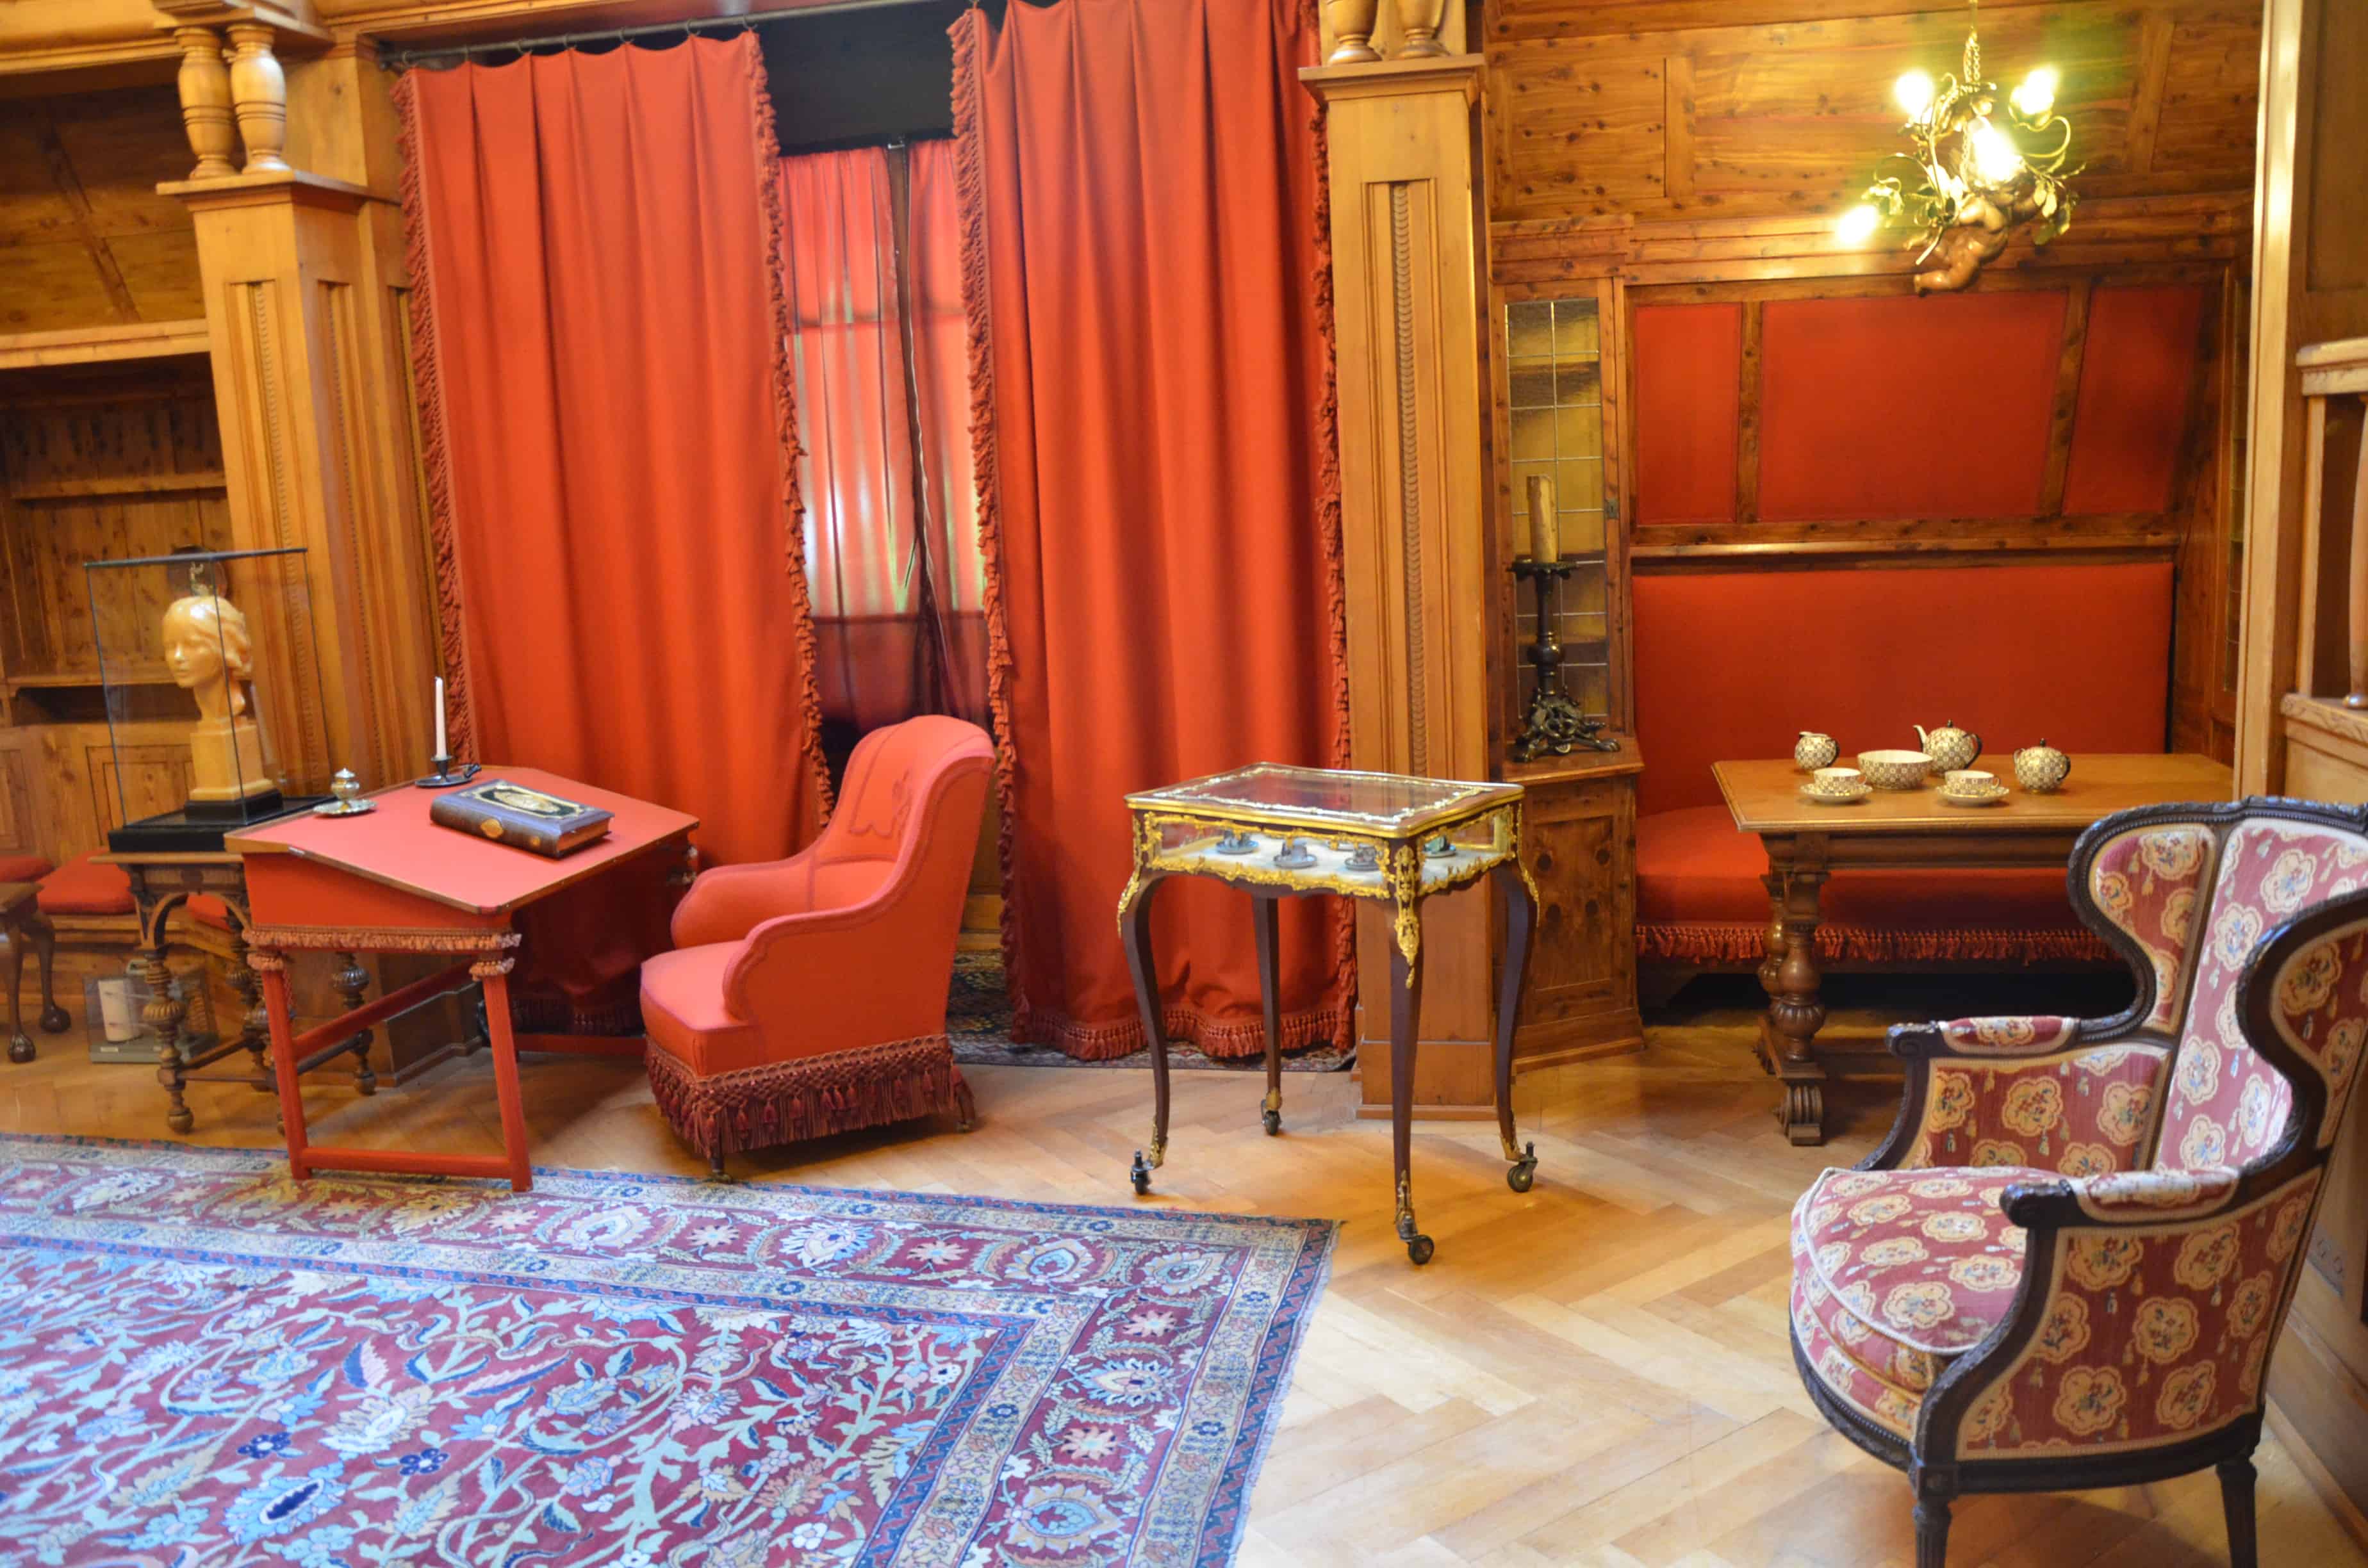 Queen Marie’s painting room at Peleș Castle in Sinaia, Romania